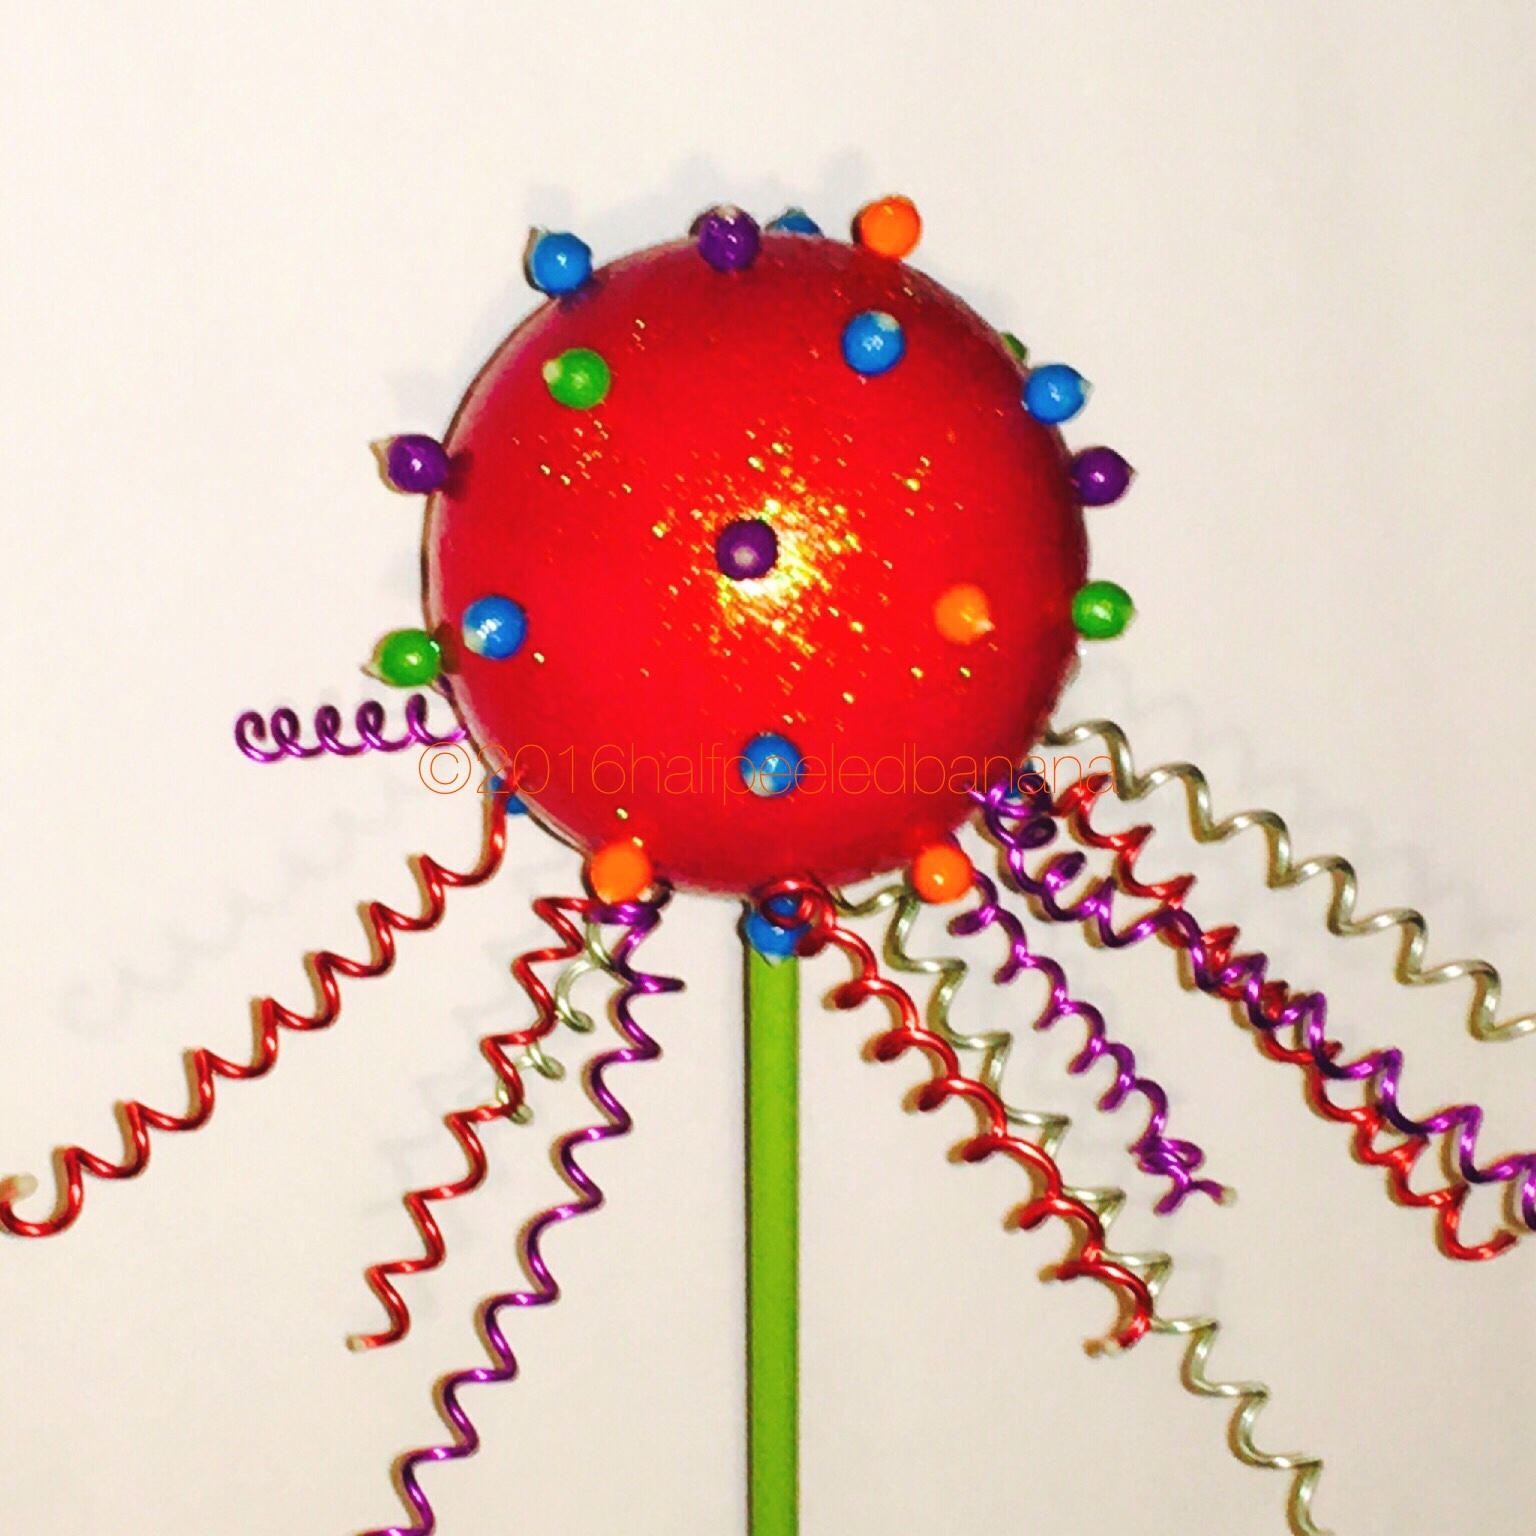 red garden art flower 8" nubbed space style on a 24" stem